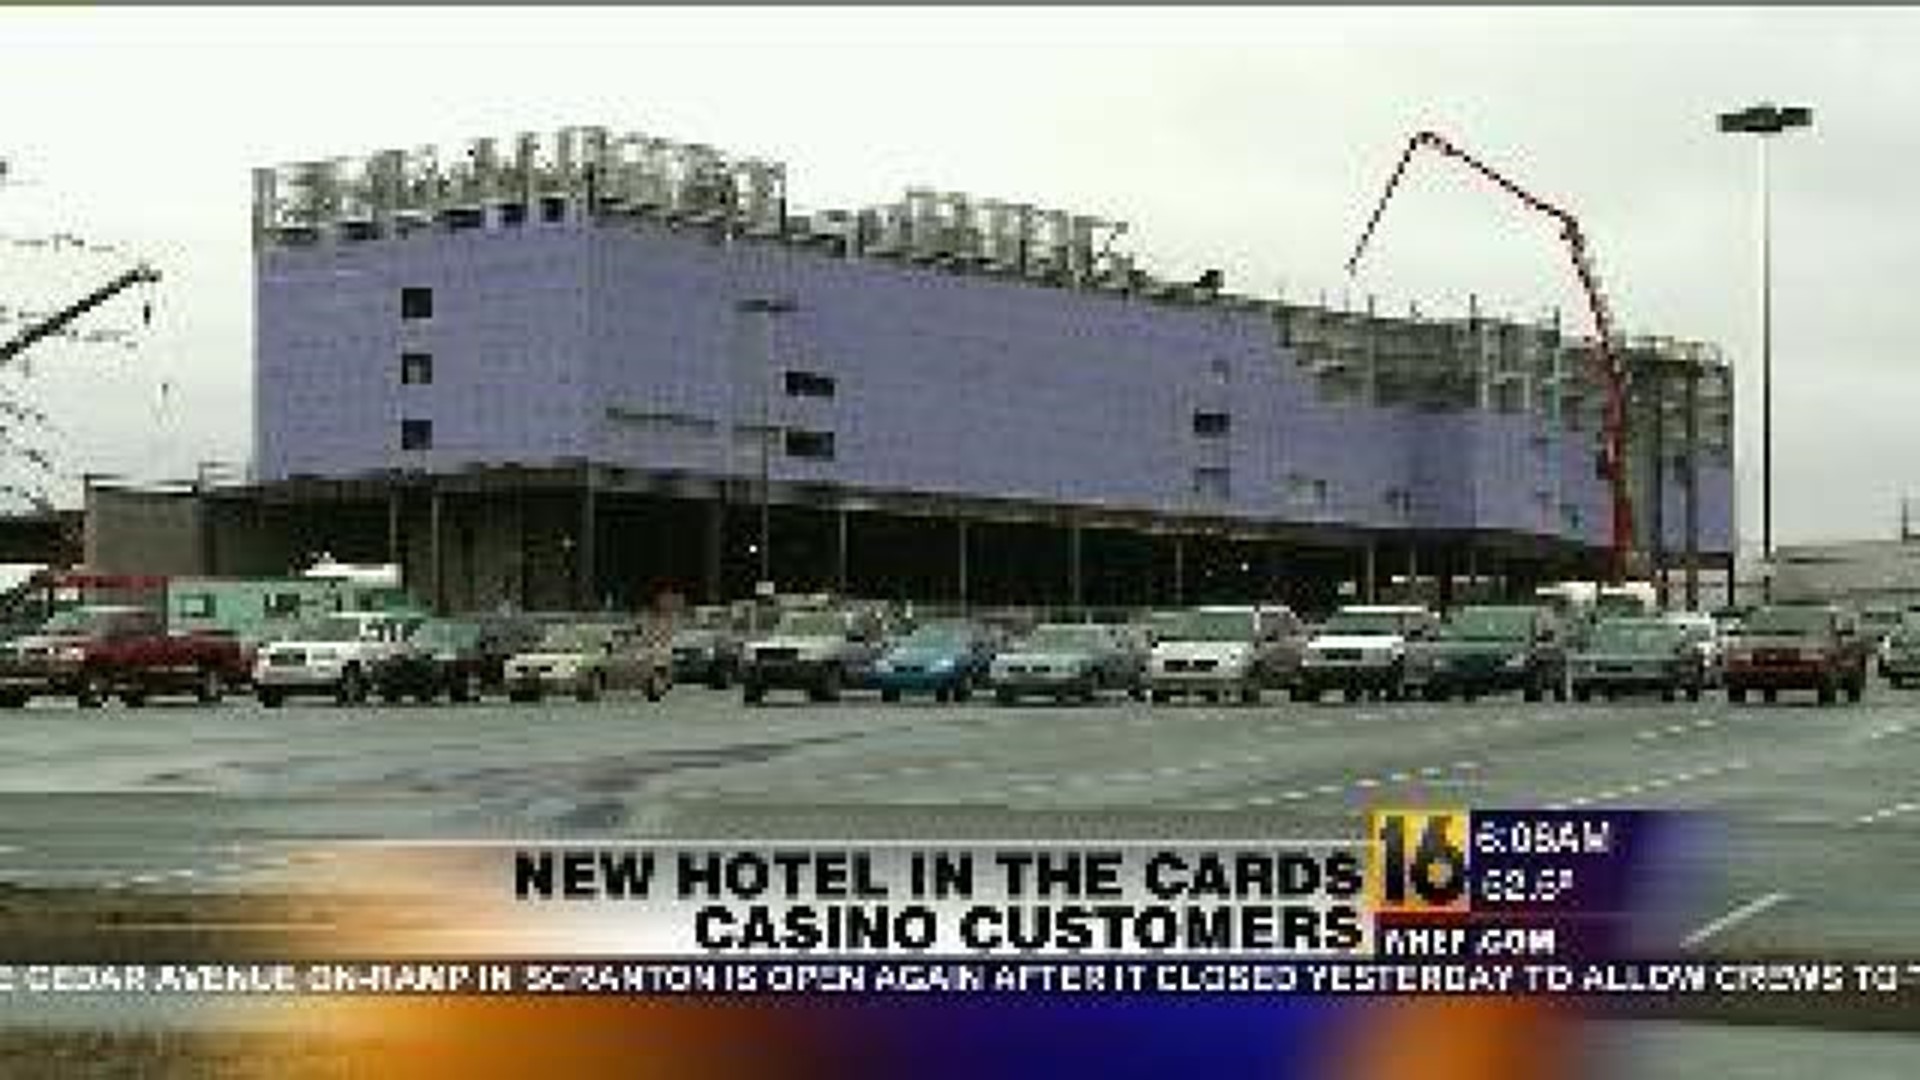 Hotel in the Cards for Casino Customers